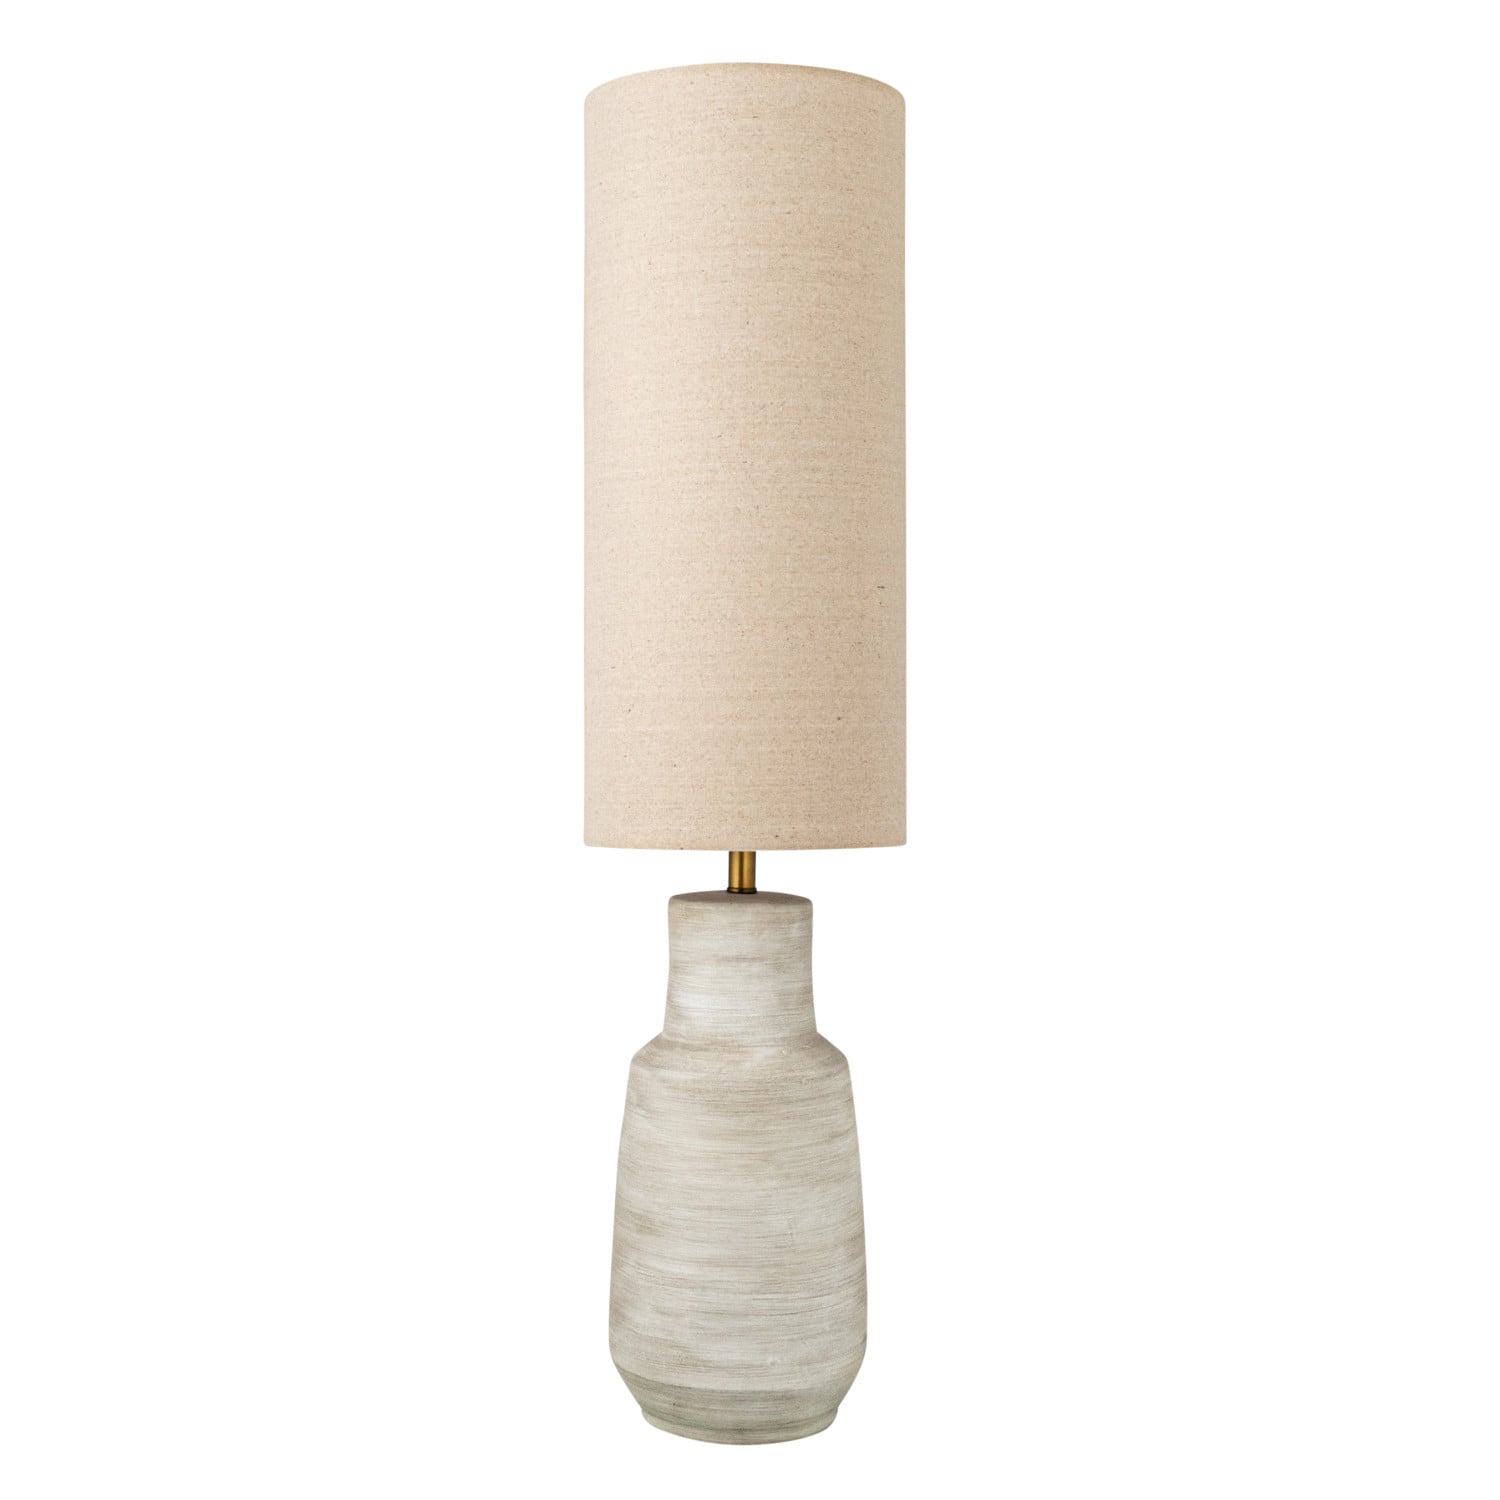 4ft. Sand Color Ceramic Floor Lamp with Linen Shade